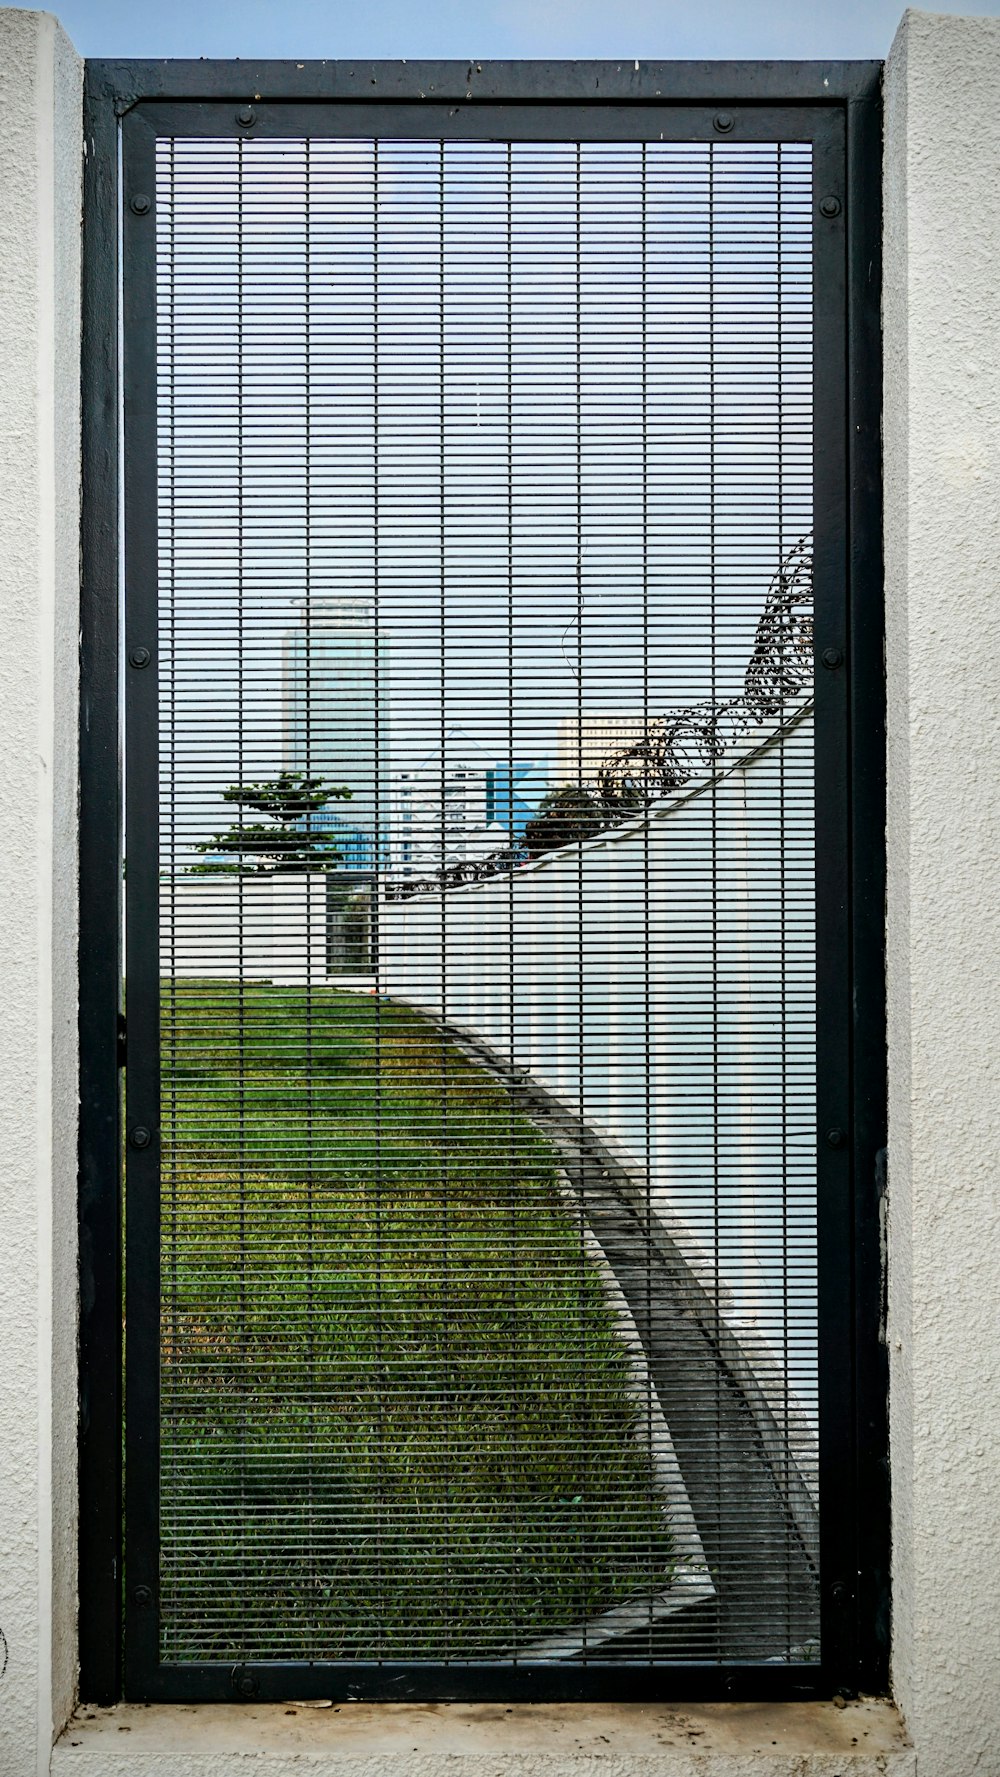 a gate with a view of a grassy area through it